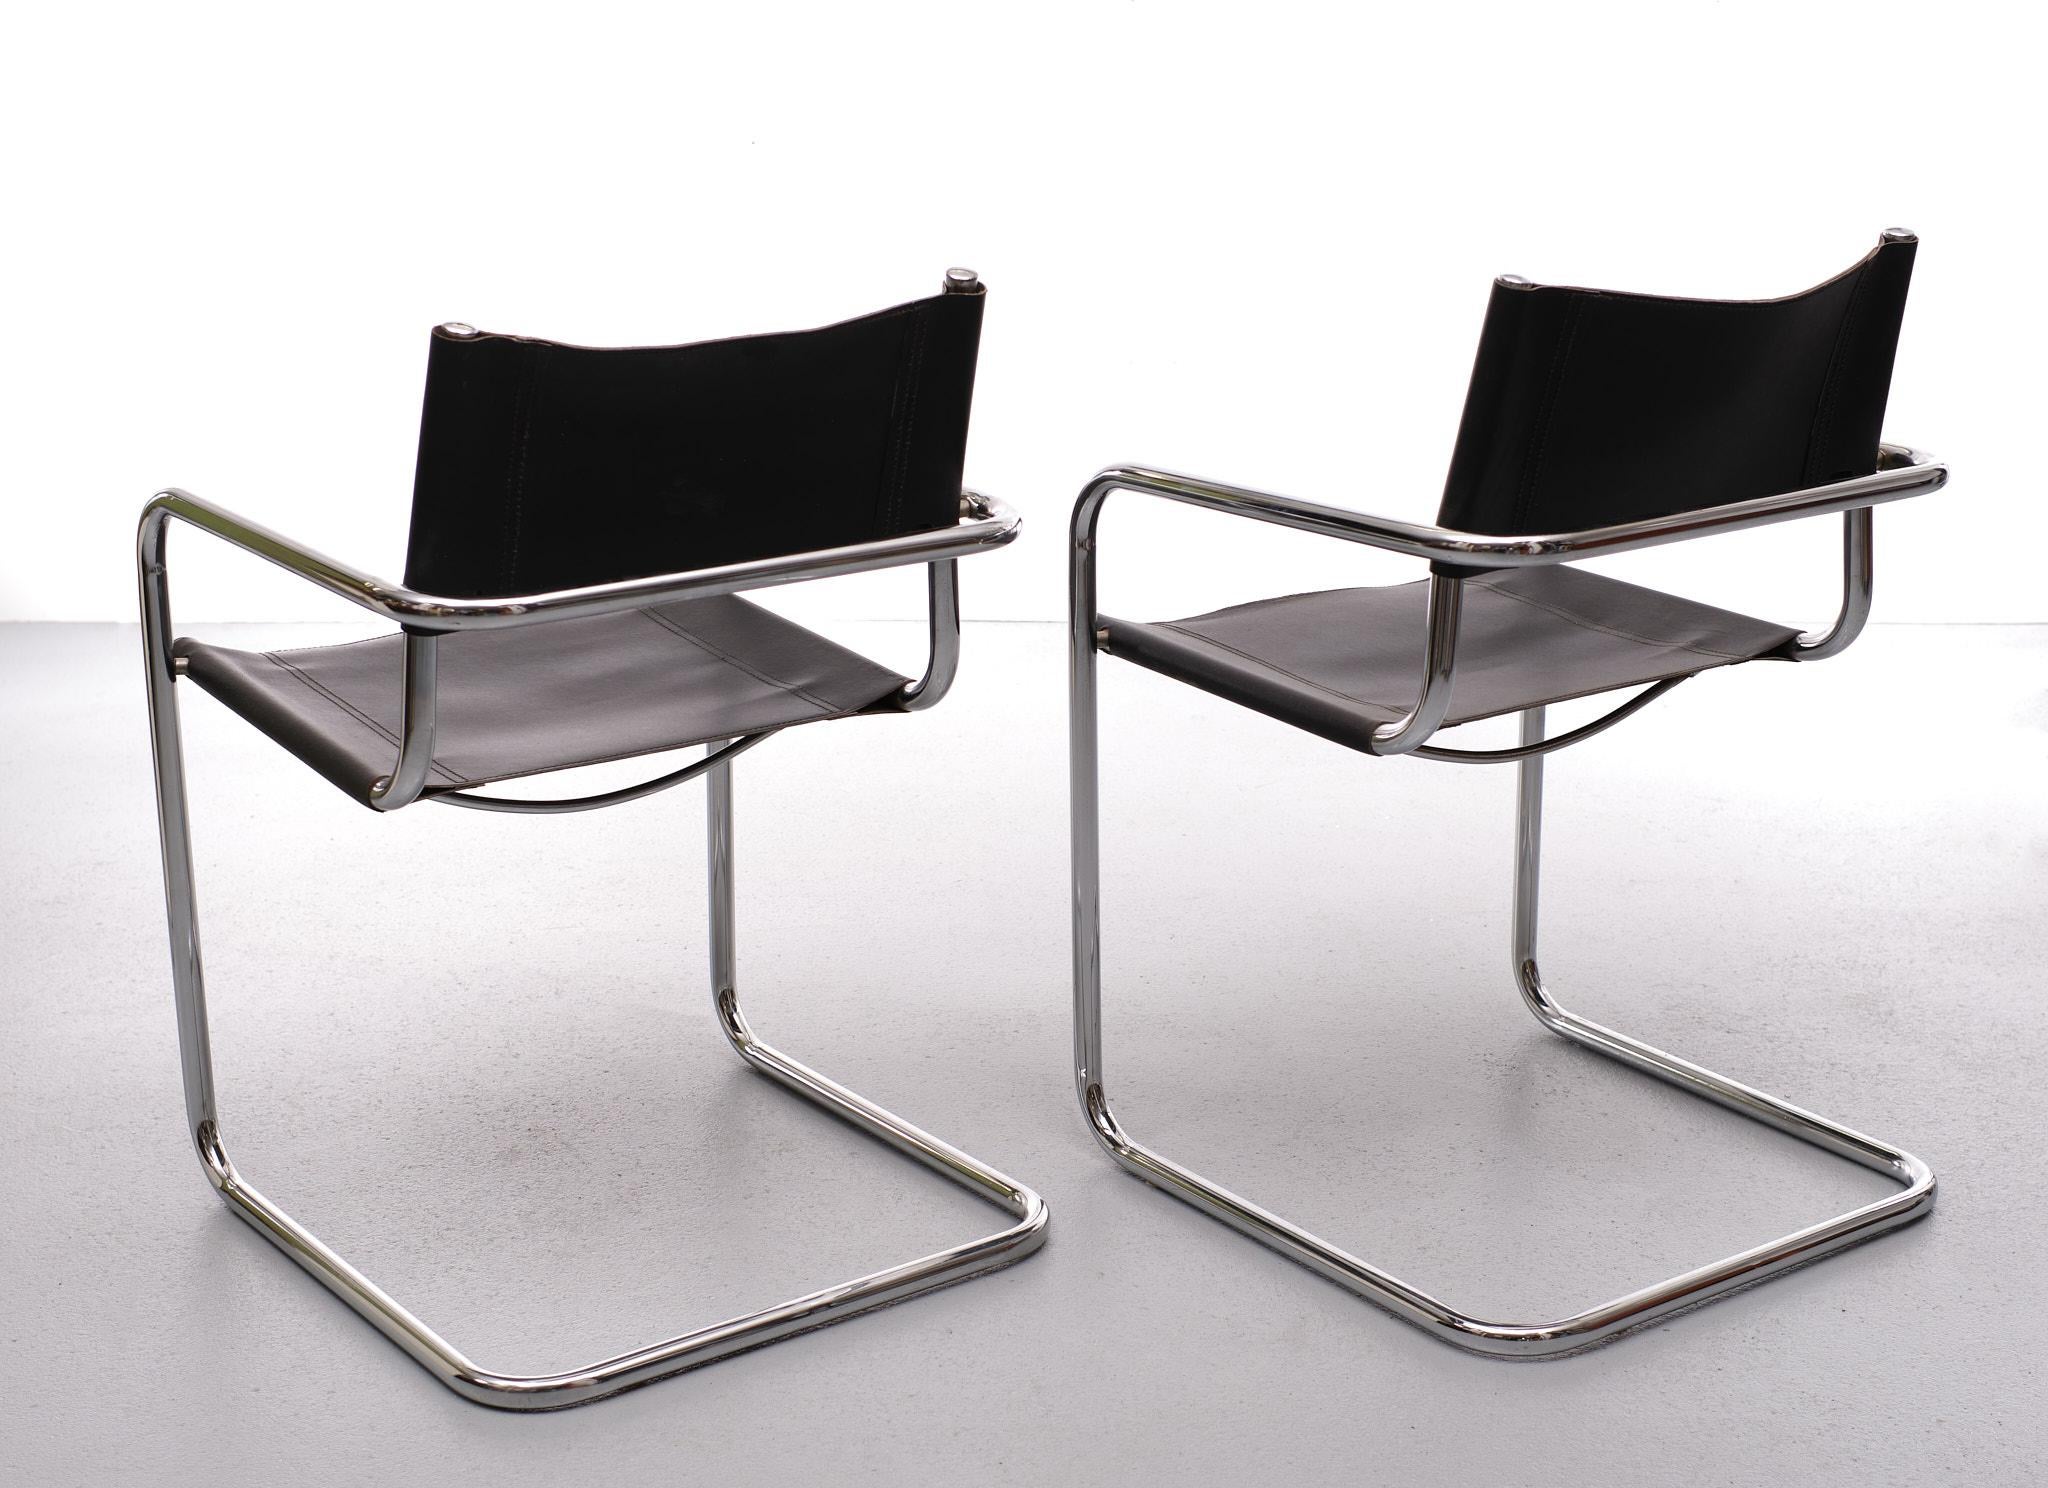 B34 Cantilever Chairs, Marcel Breuer Design, Bauhaus Chairs, Italy 80 For Sale 3